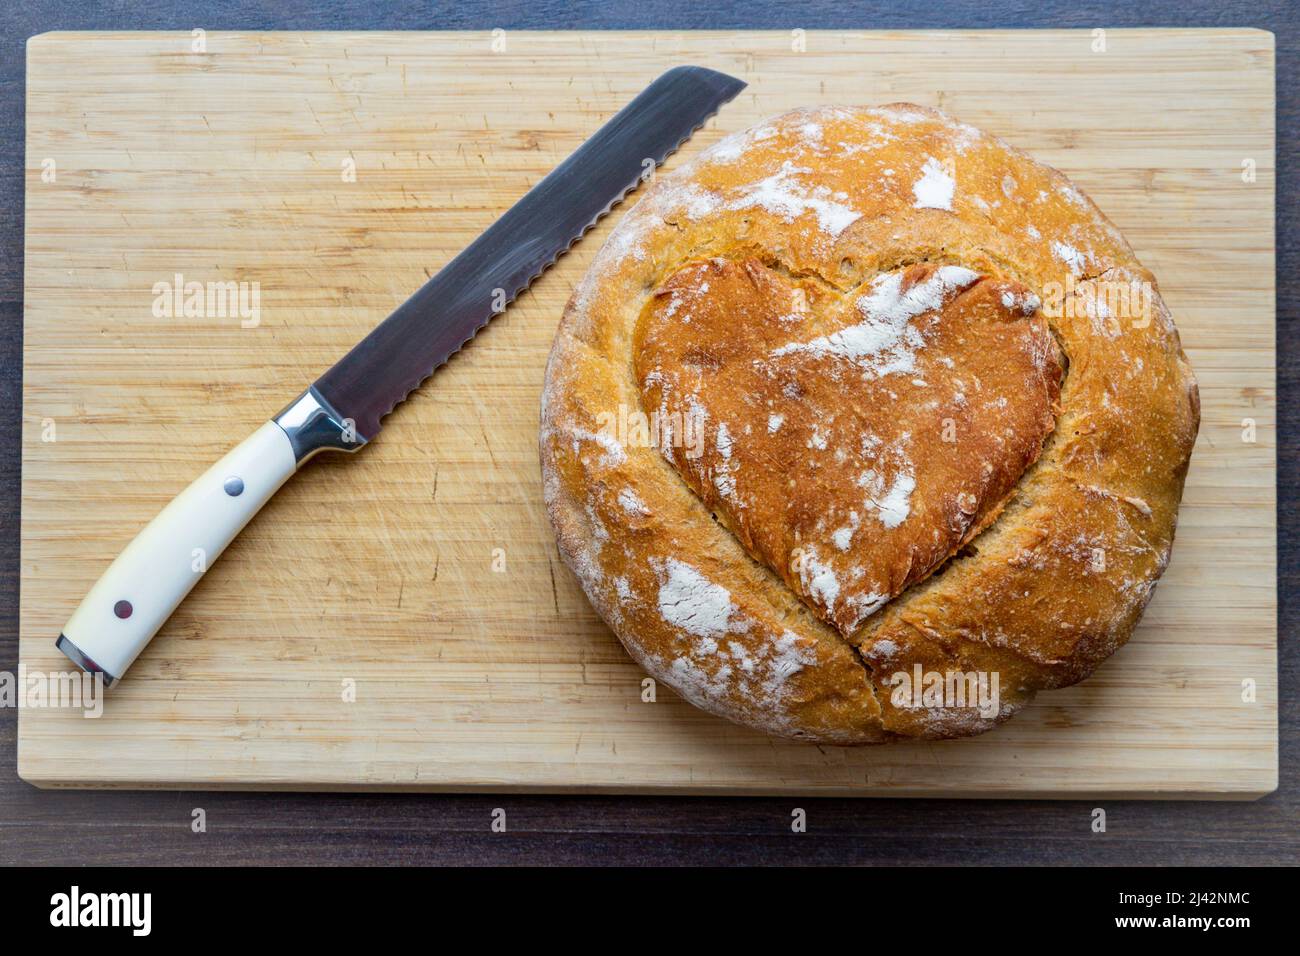 A freshly baked bread with a heart carved into the crust lies on a wooden slate beside a bread knife Stock Photo